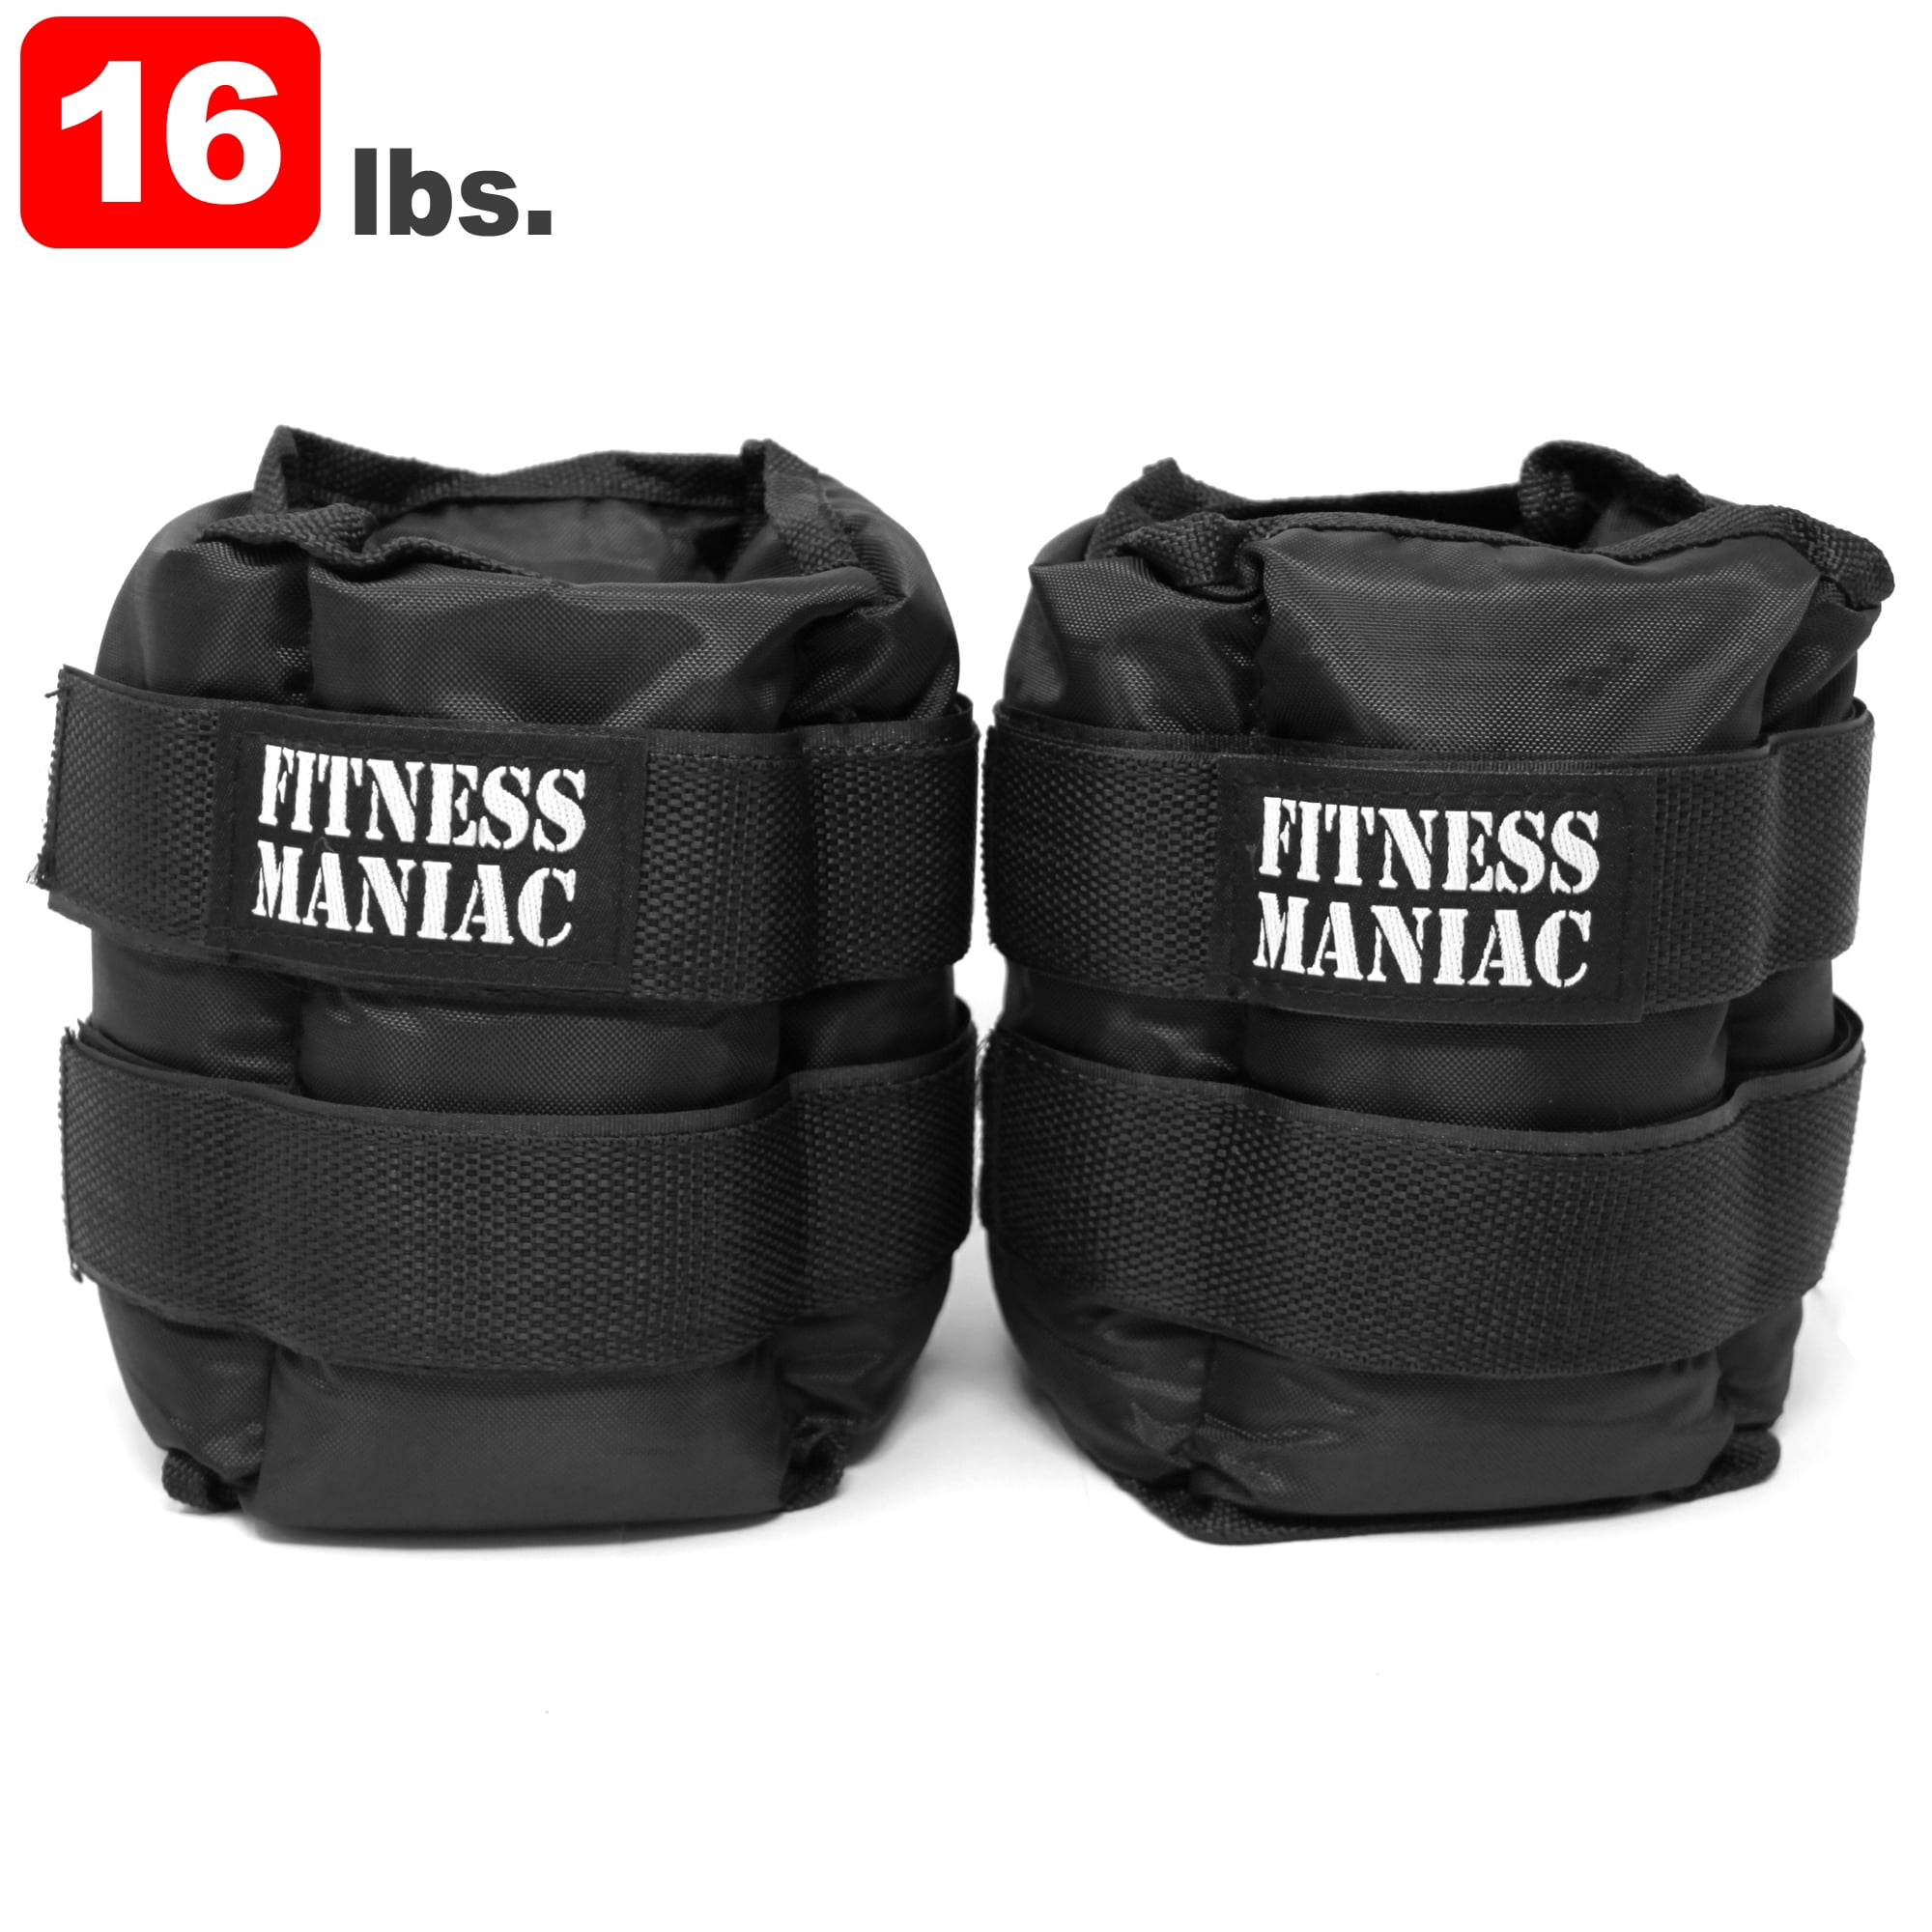 Ankle Weights 10 lb Pair Gym Leg Exercise Calorie Routine Workout Adjustable New 